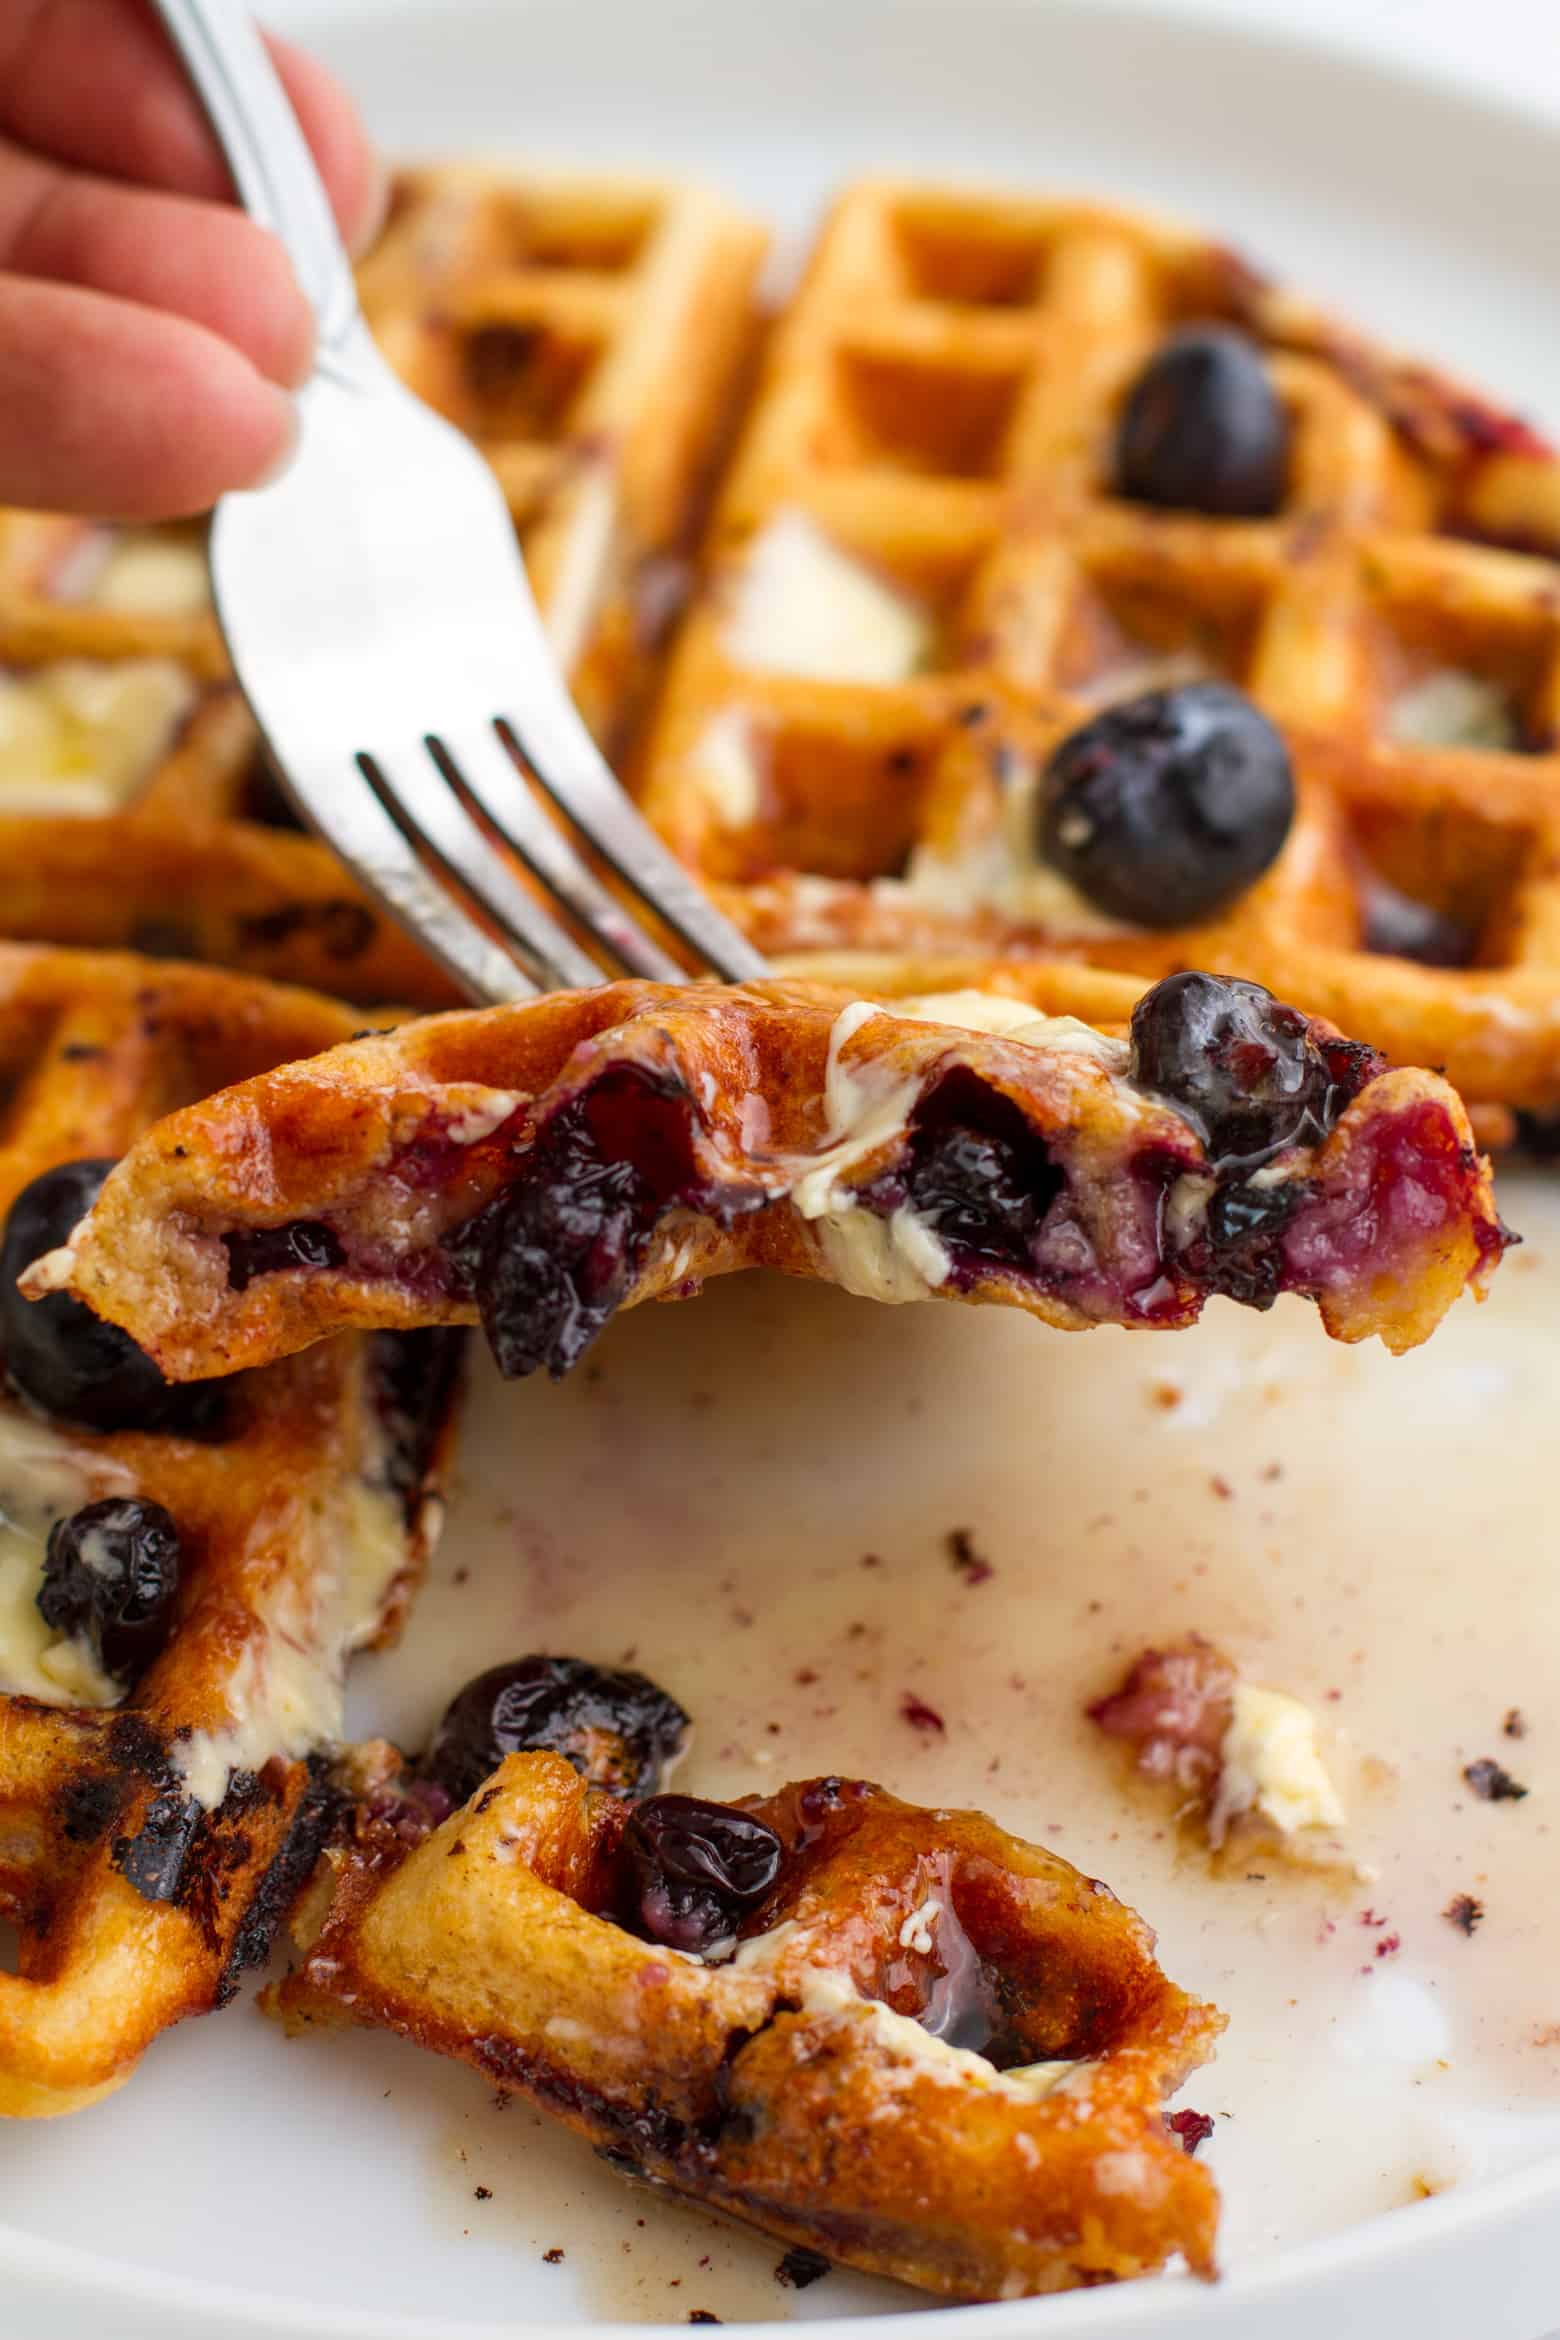 Cut into blueberry waffle